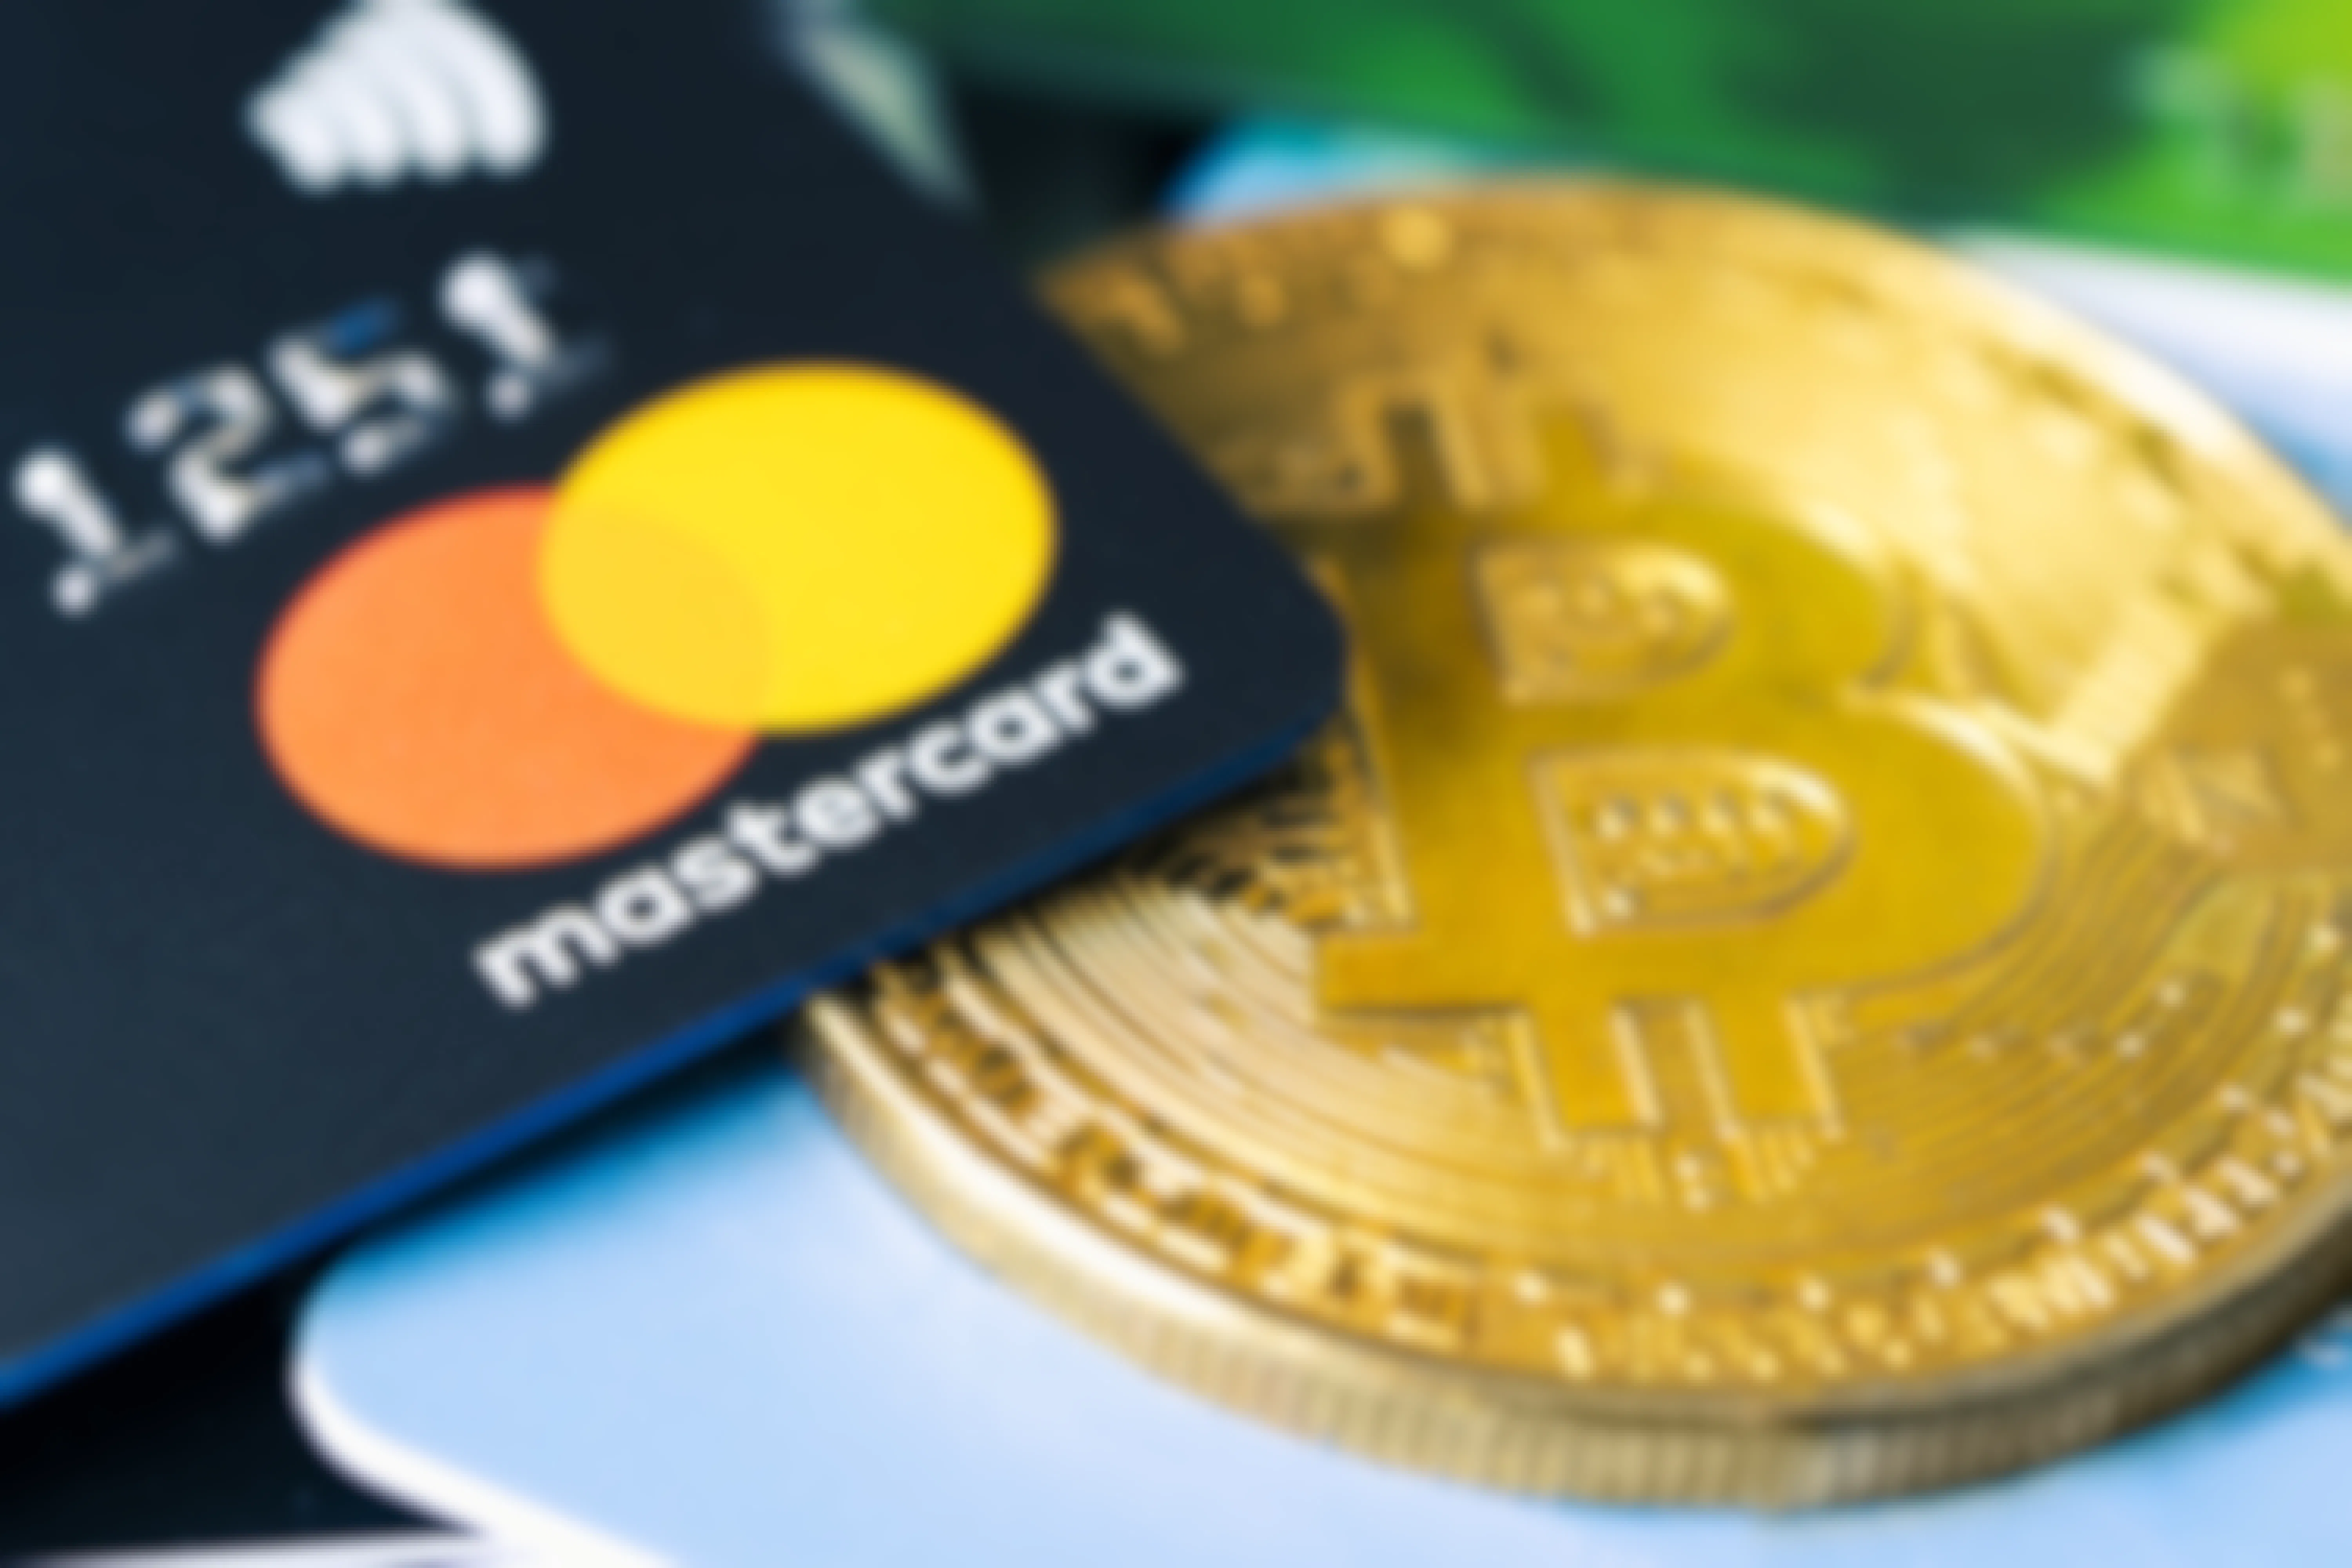 mastercard is sitting on top of a bitcoin